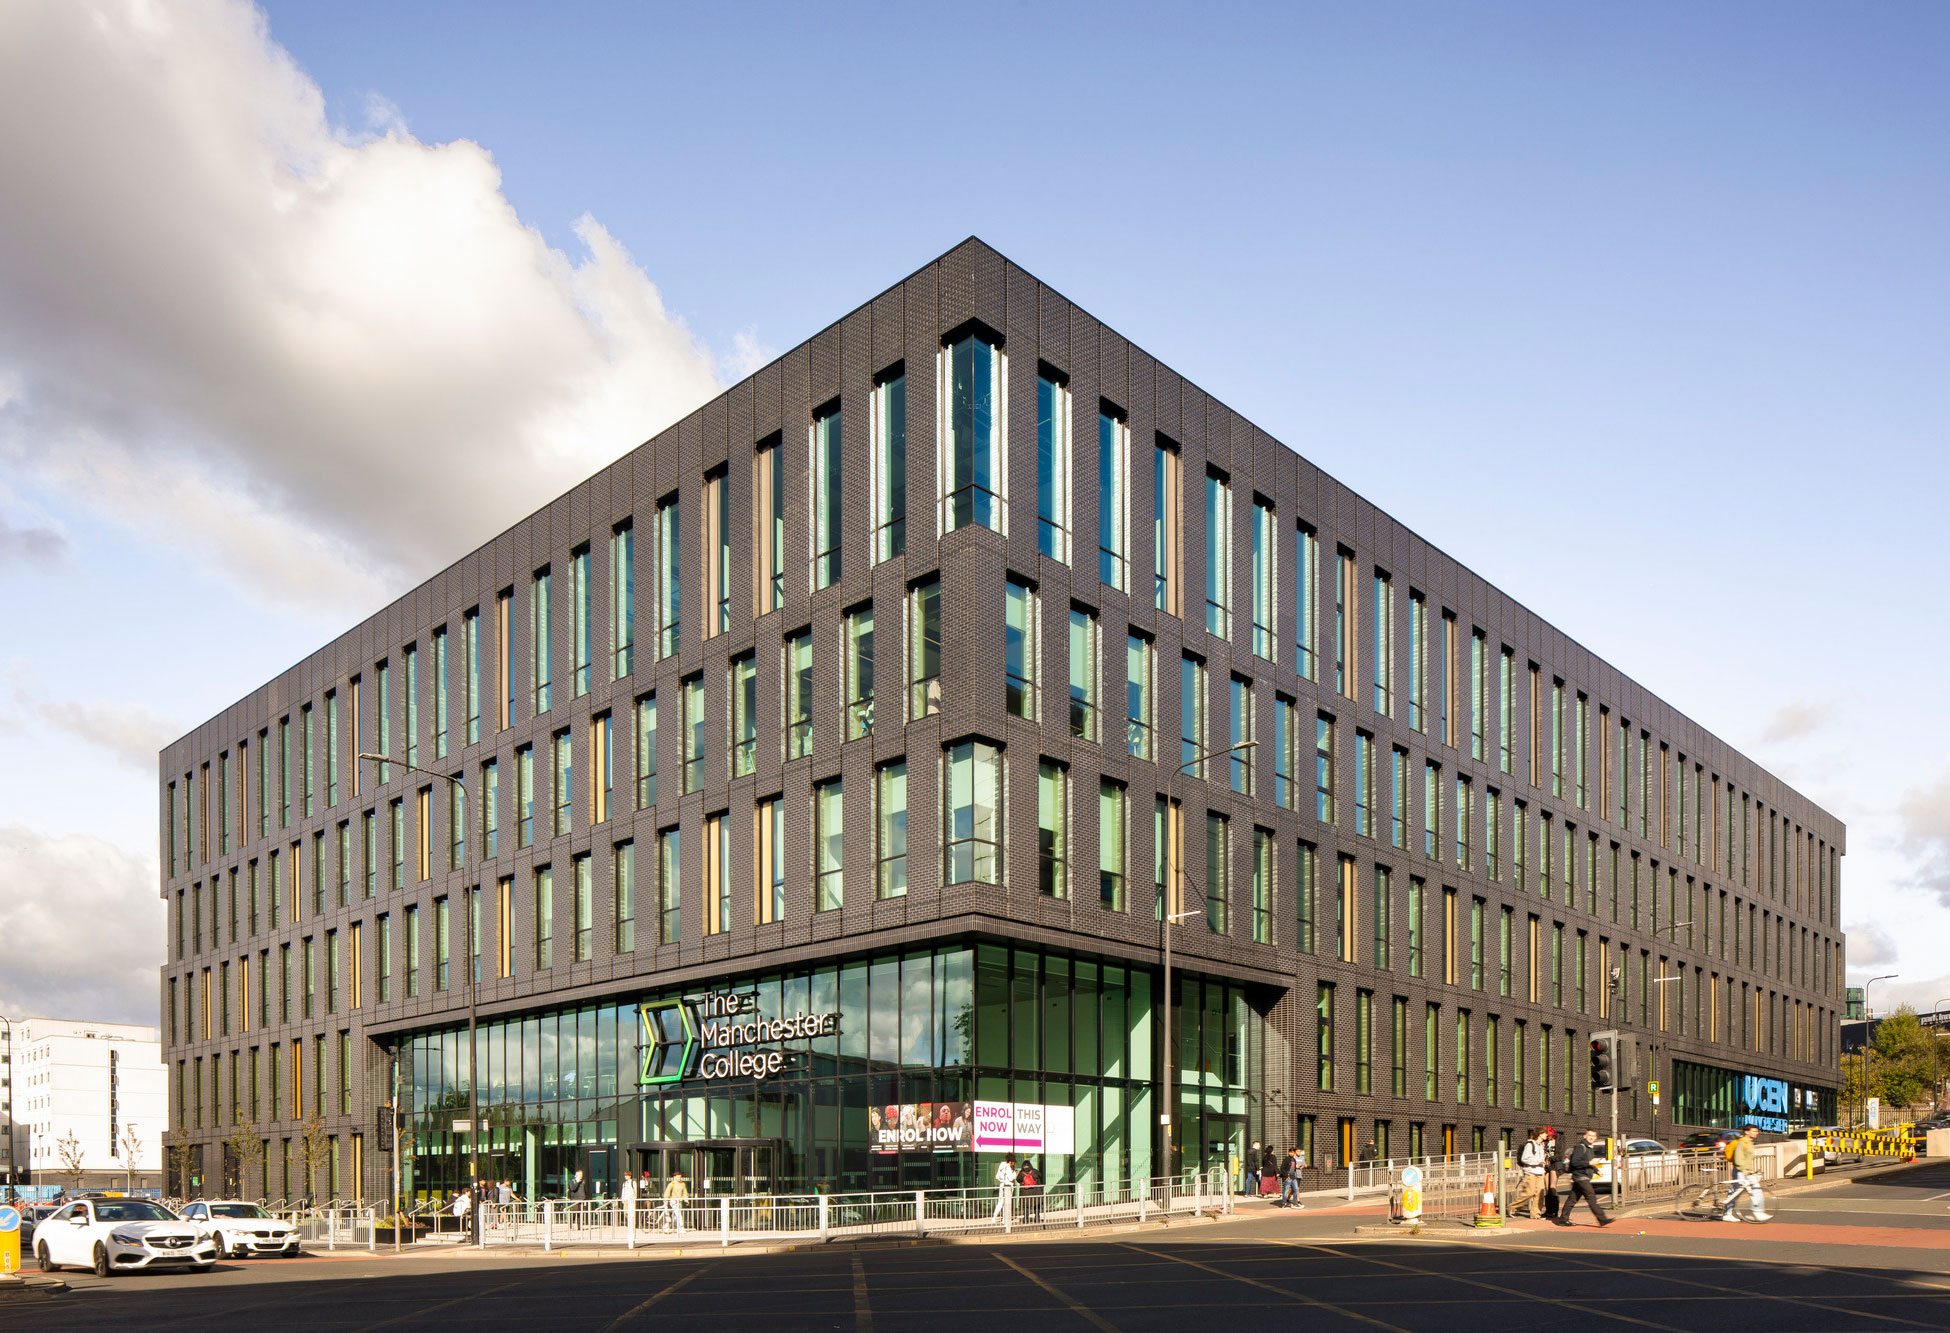 Manchester’s new, sustainable, State-Of-The-Art College Campus opens to students